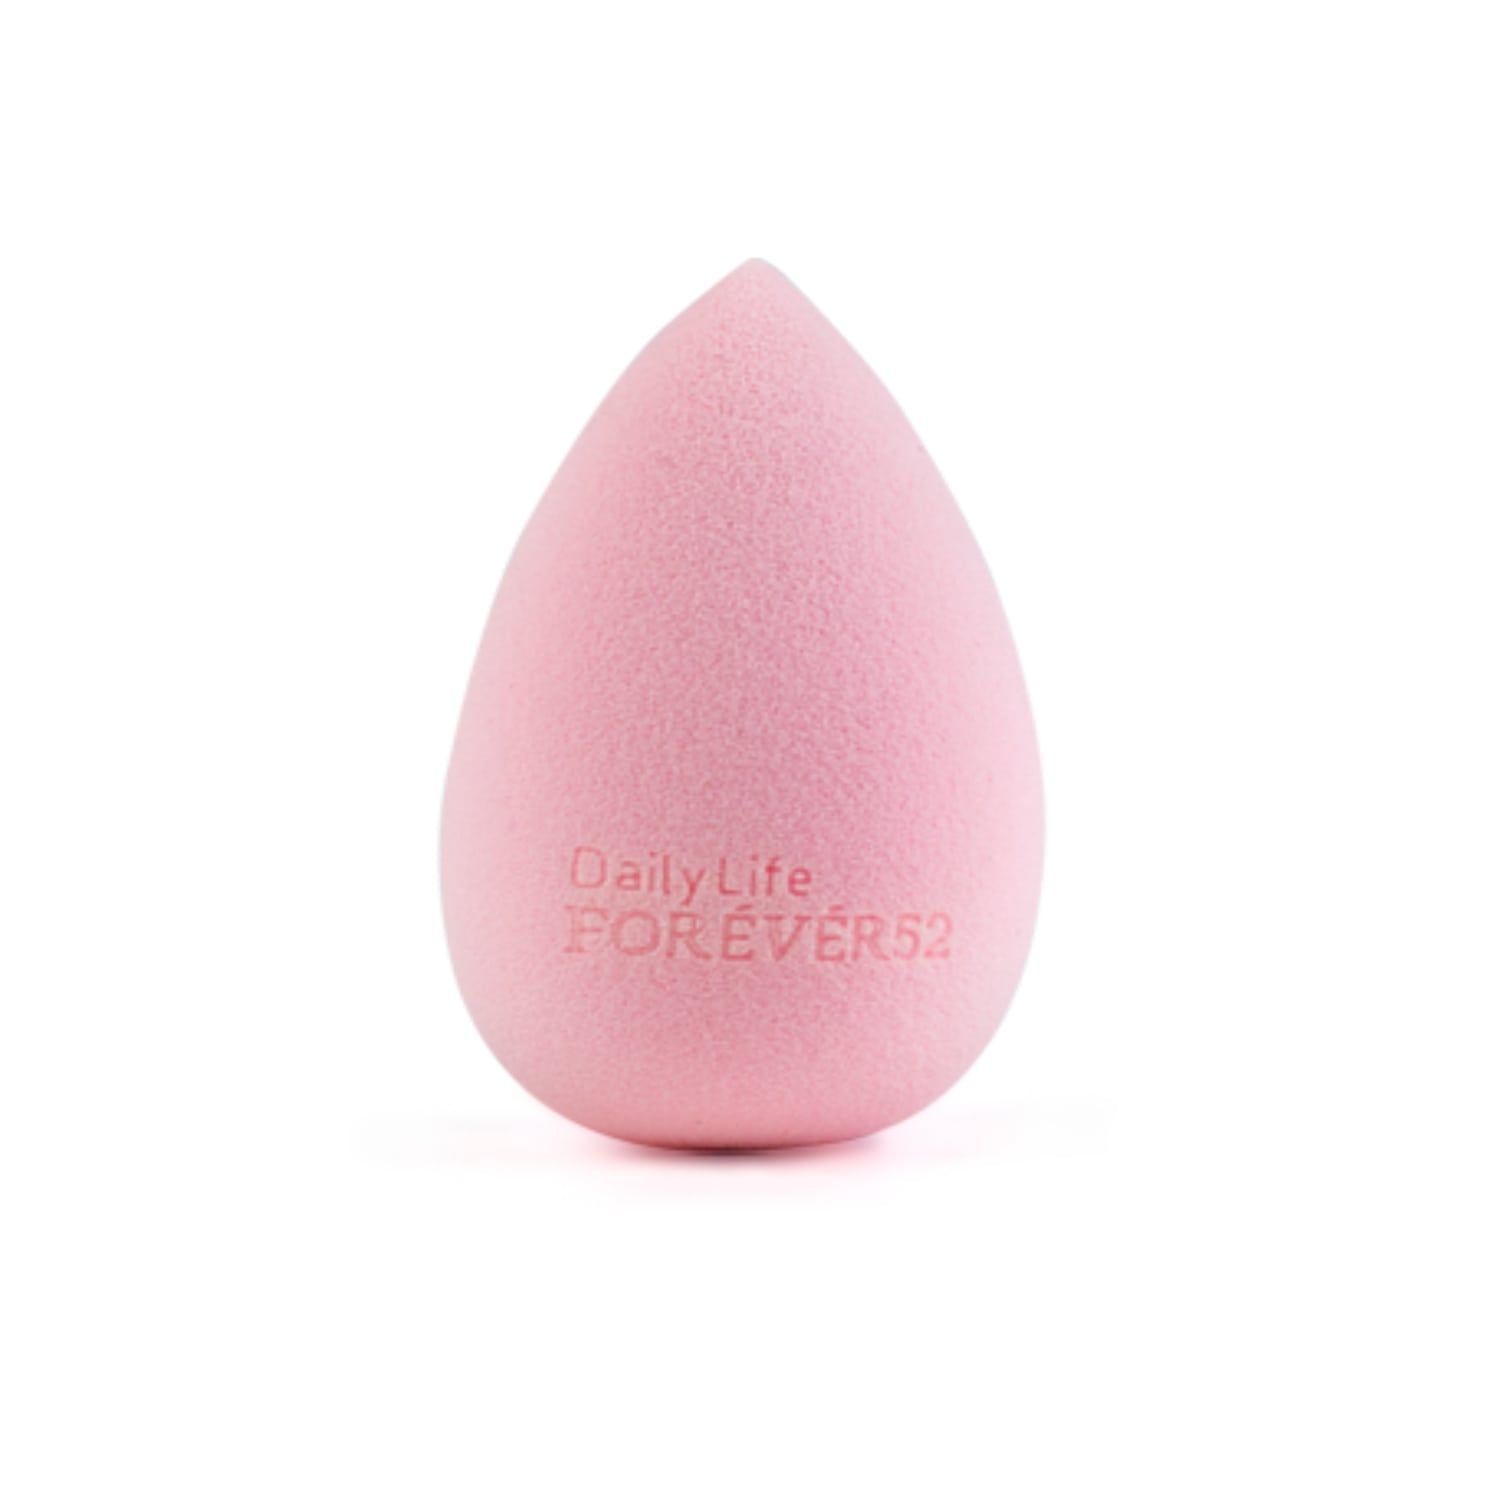 Buy Daily Life Forever52 Beauty Sponge SP011 (1 PCS) Colour may vary - Purplle